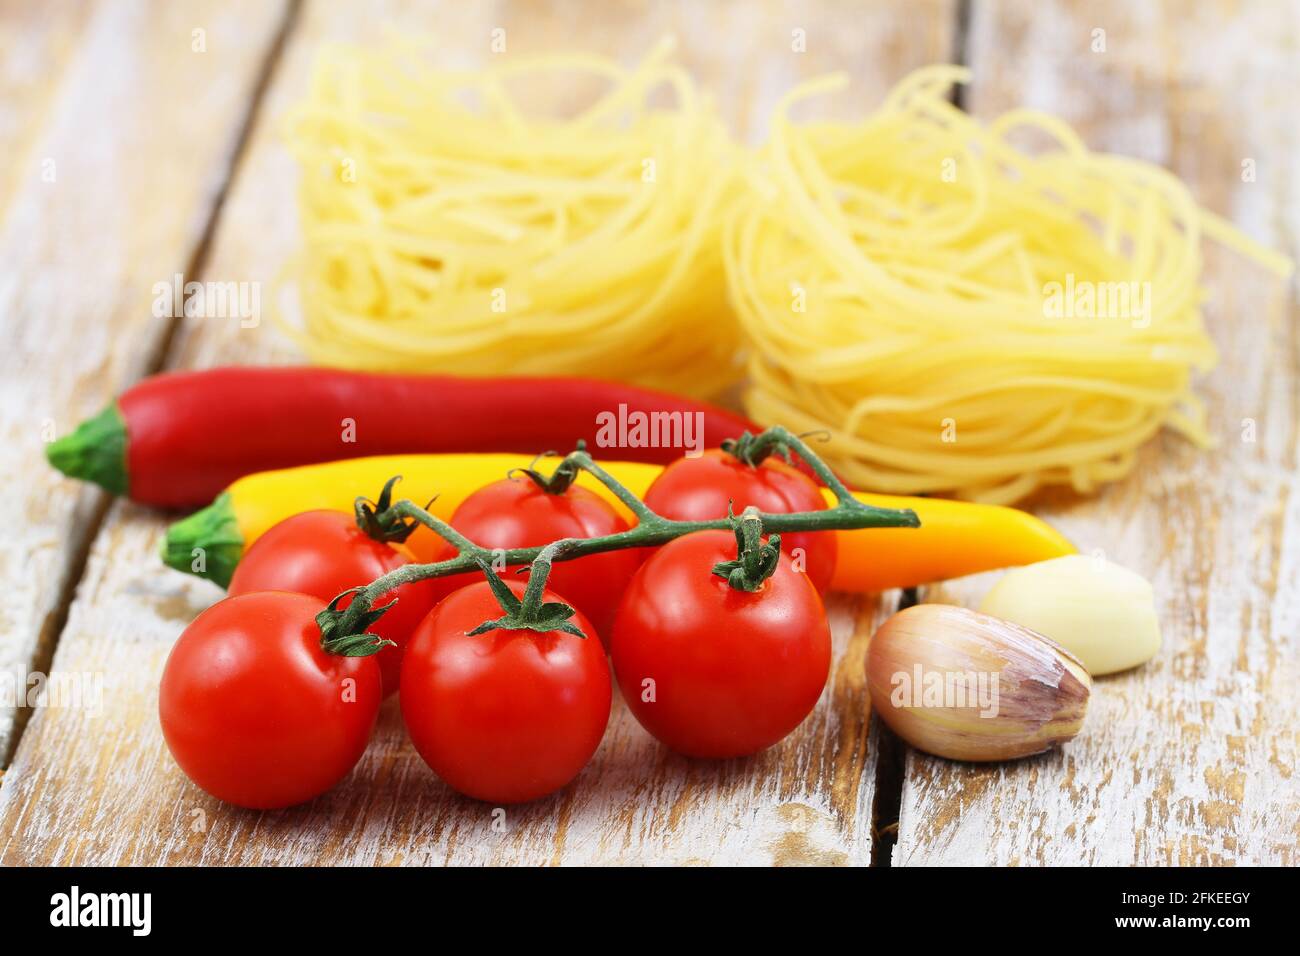 Selection of cooking ingredients: tagliatelle, cherry tomatoes, garlic cloves and chilies on wooden surface Stock Photo